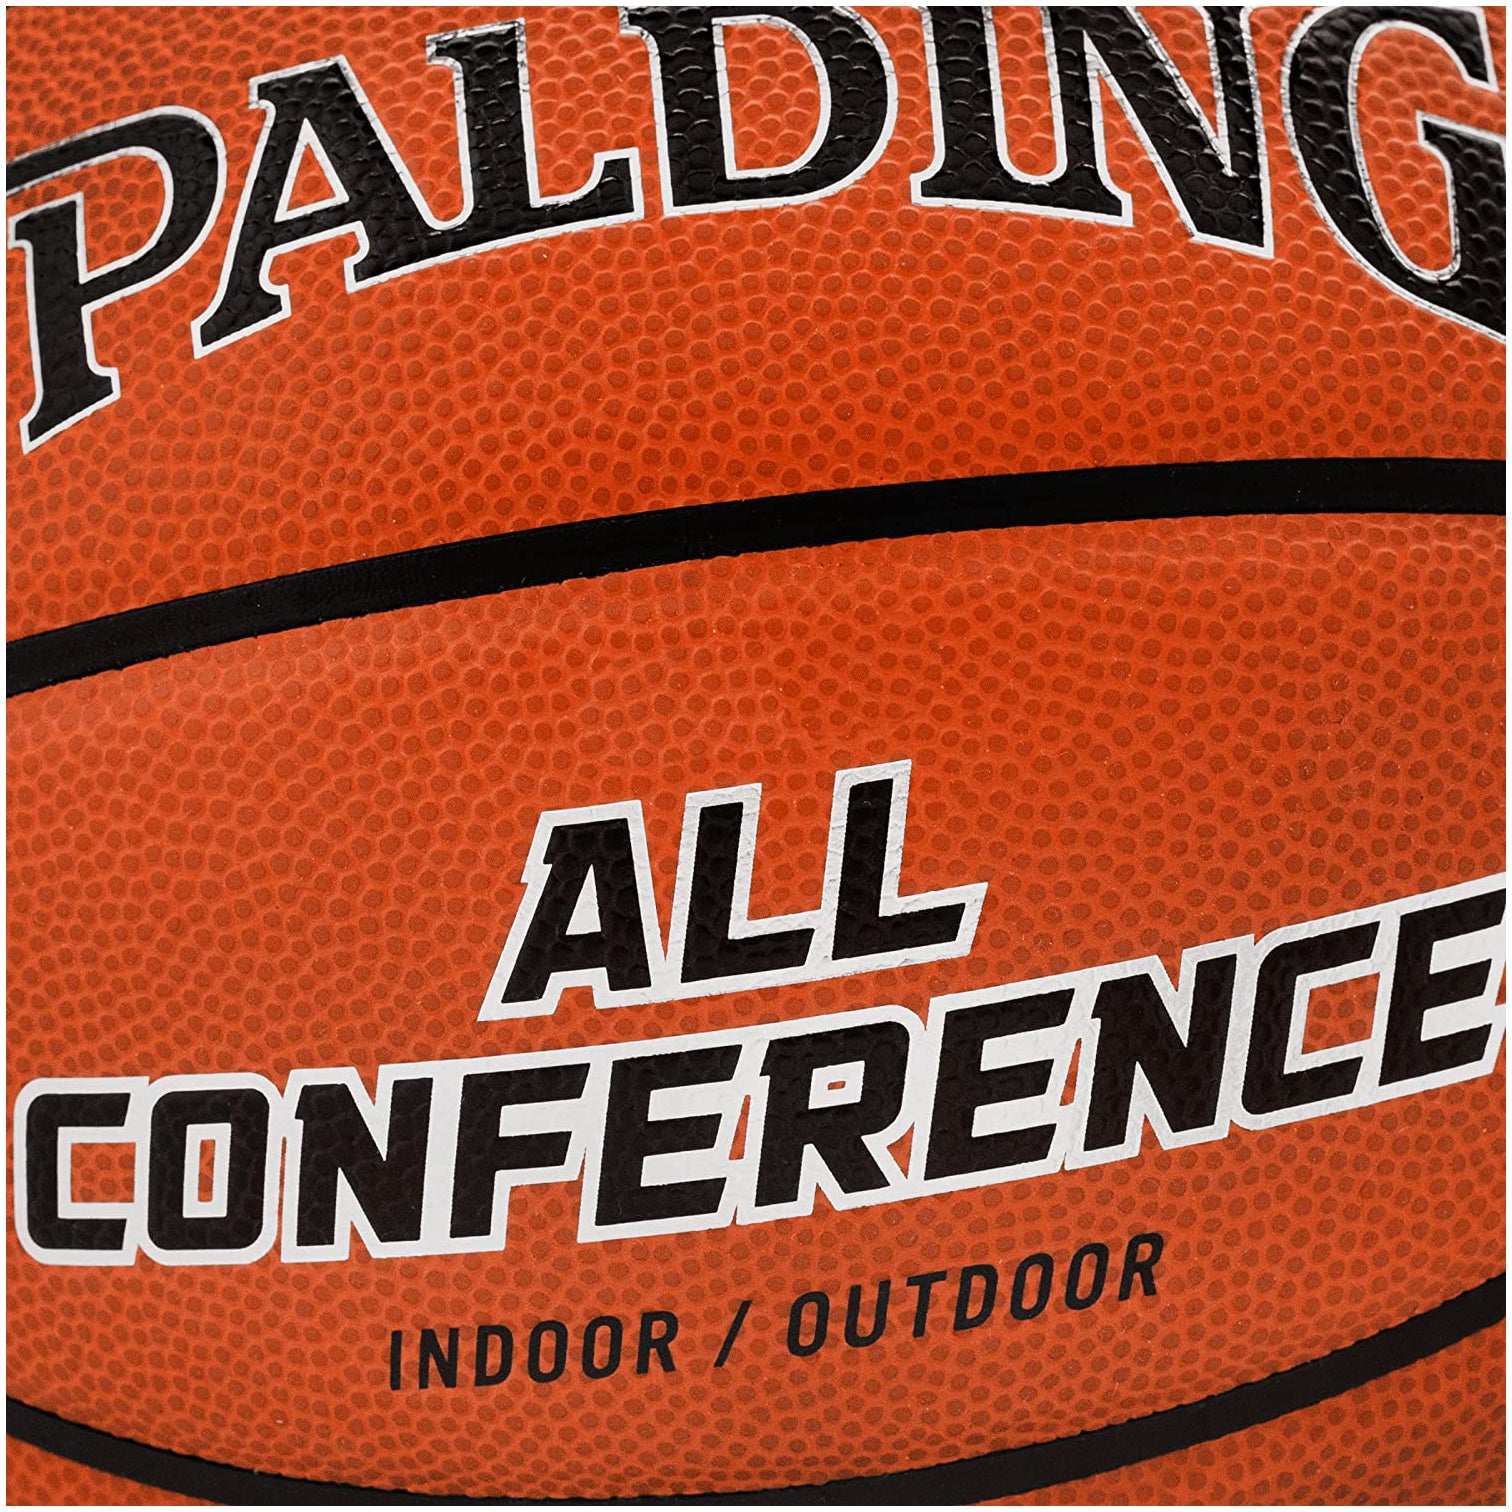 Spalding All Conference Indoor/Outdoor Basketball Spalding